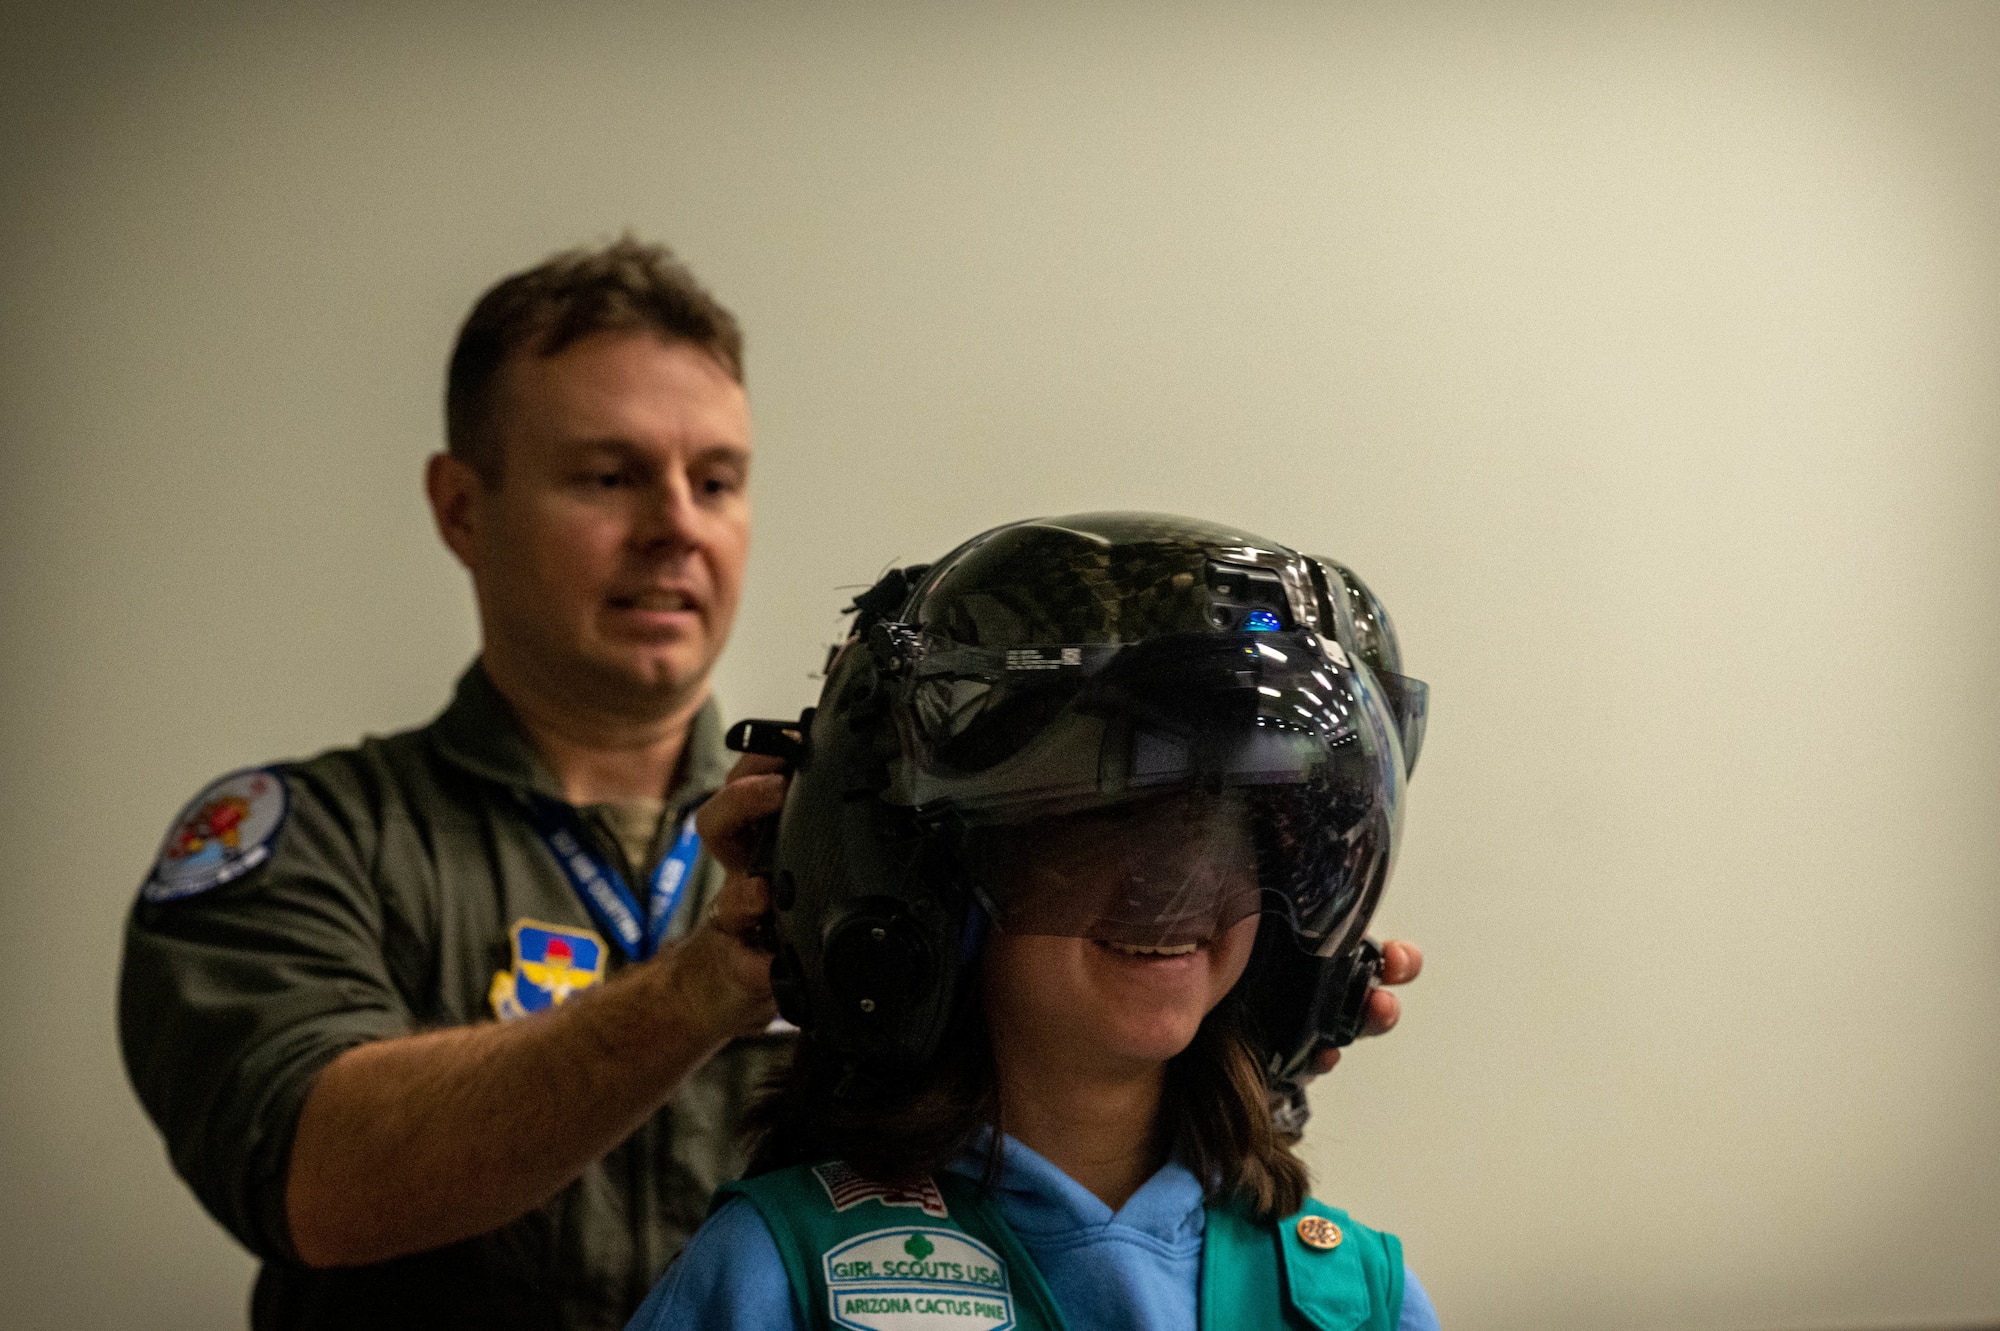 U.S. Air Force Lt. Col. Tyler Smith, 62nd Fighter Squadron commander, fits an F-35A Lightning II helmet onto a Girl Scout Jan. 11, 2023, at Luke Air Force Base, Arizona.